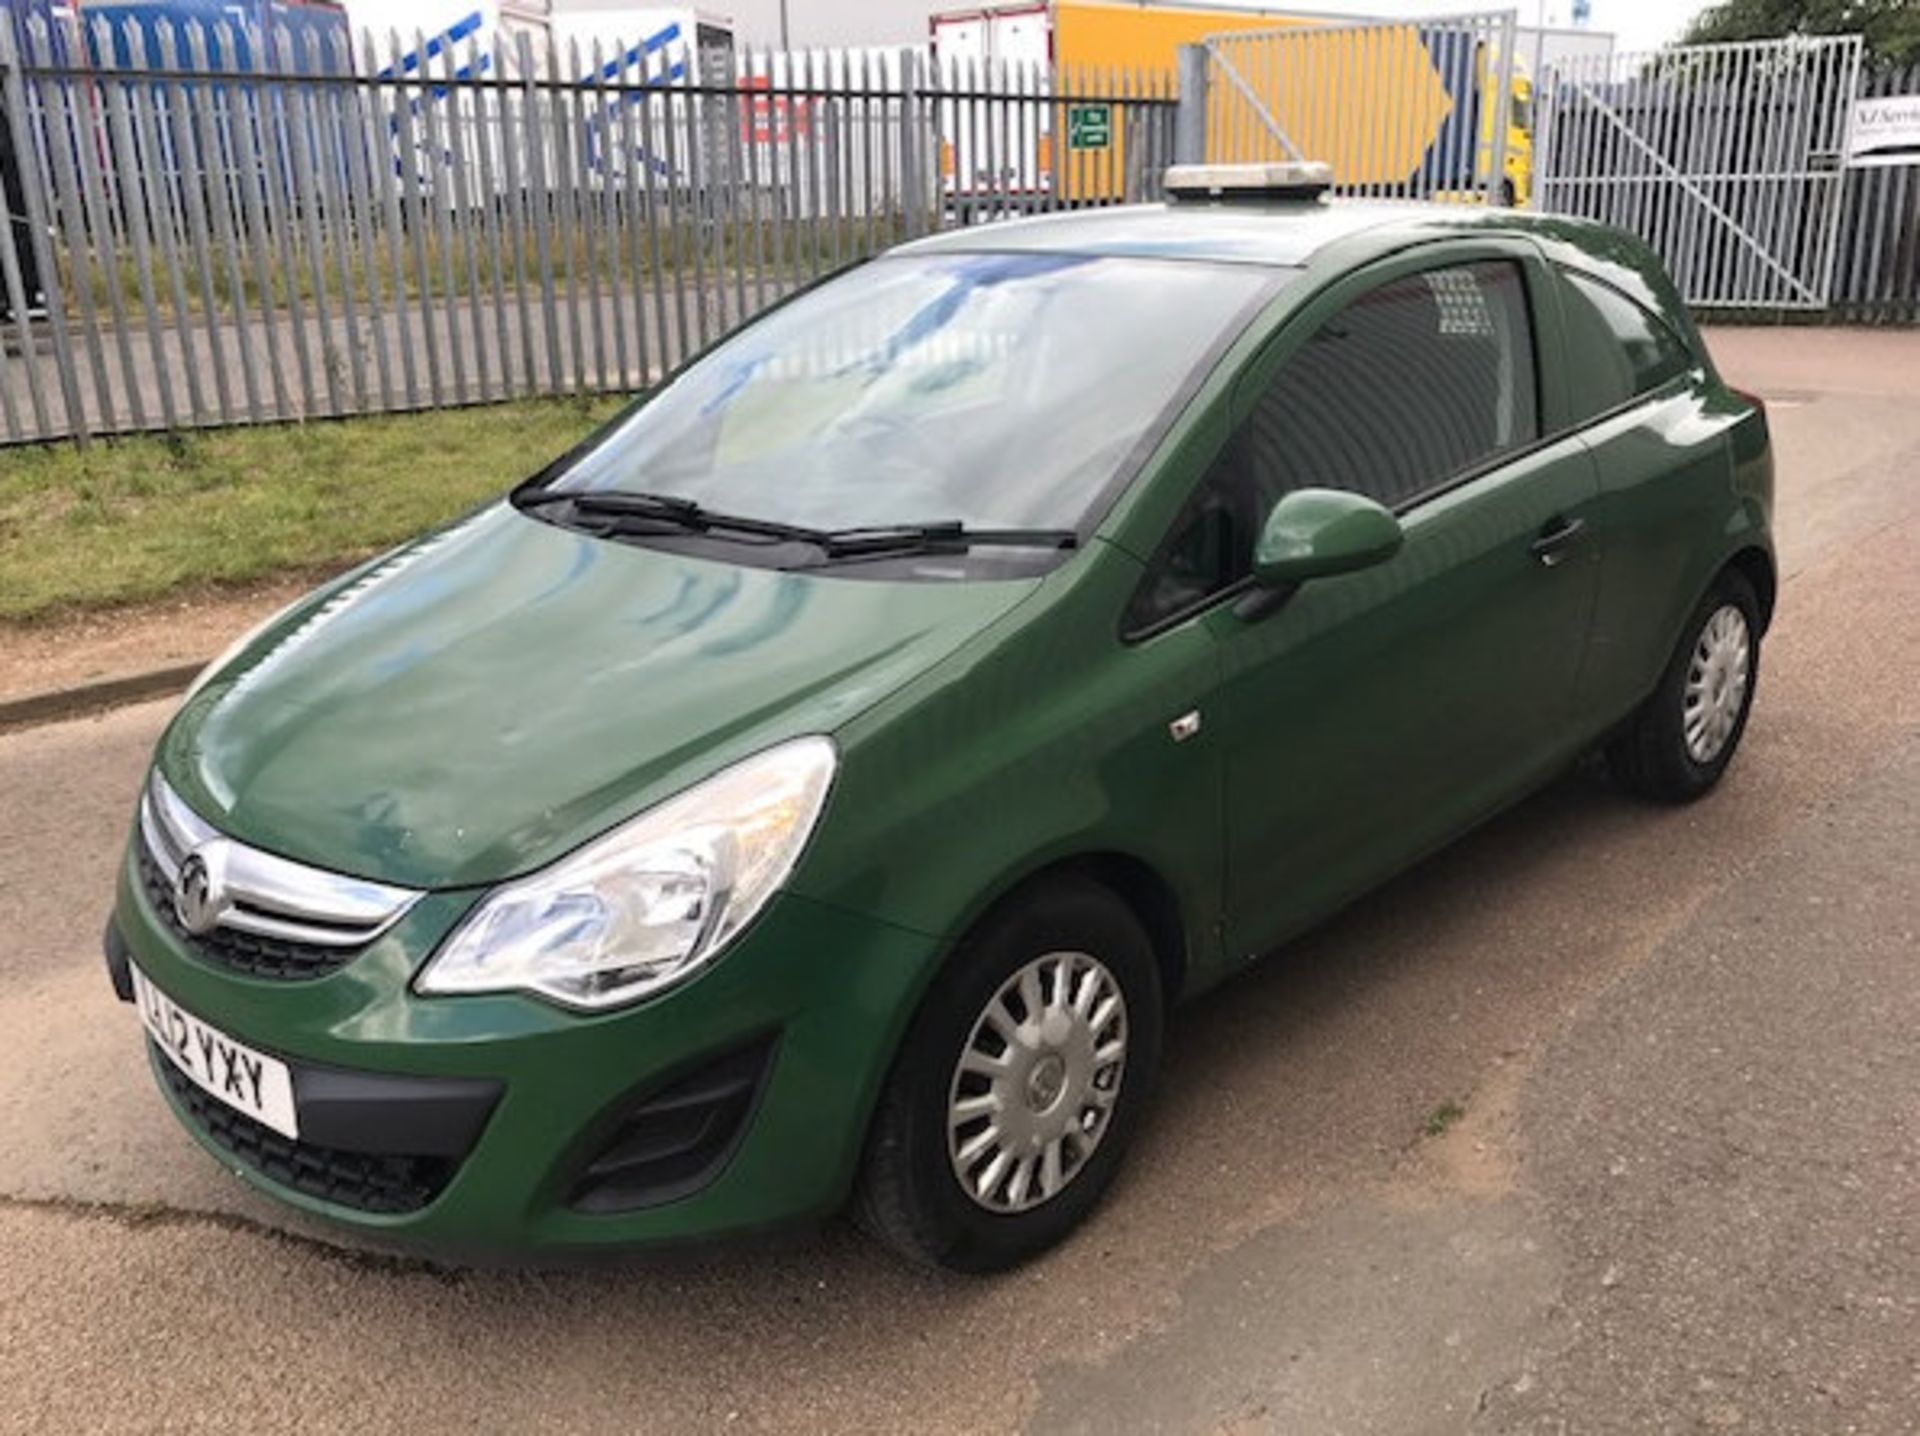 2012 Vauxhall Corsa 1.3 CDTI 3 Dr Panel Van - CL505 - Location: Corby, NorthamptonshireDescription - Image 4 of 11